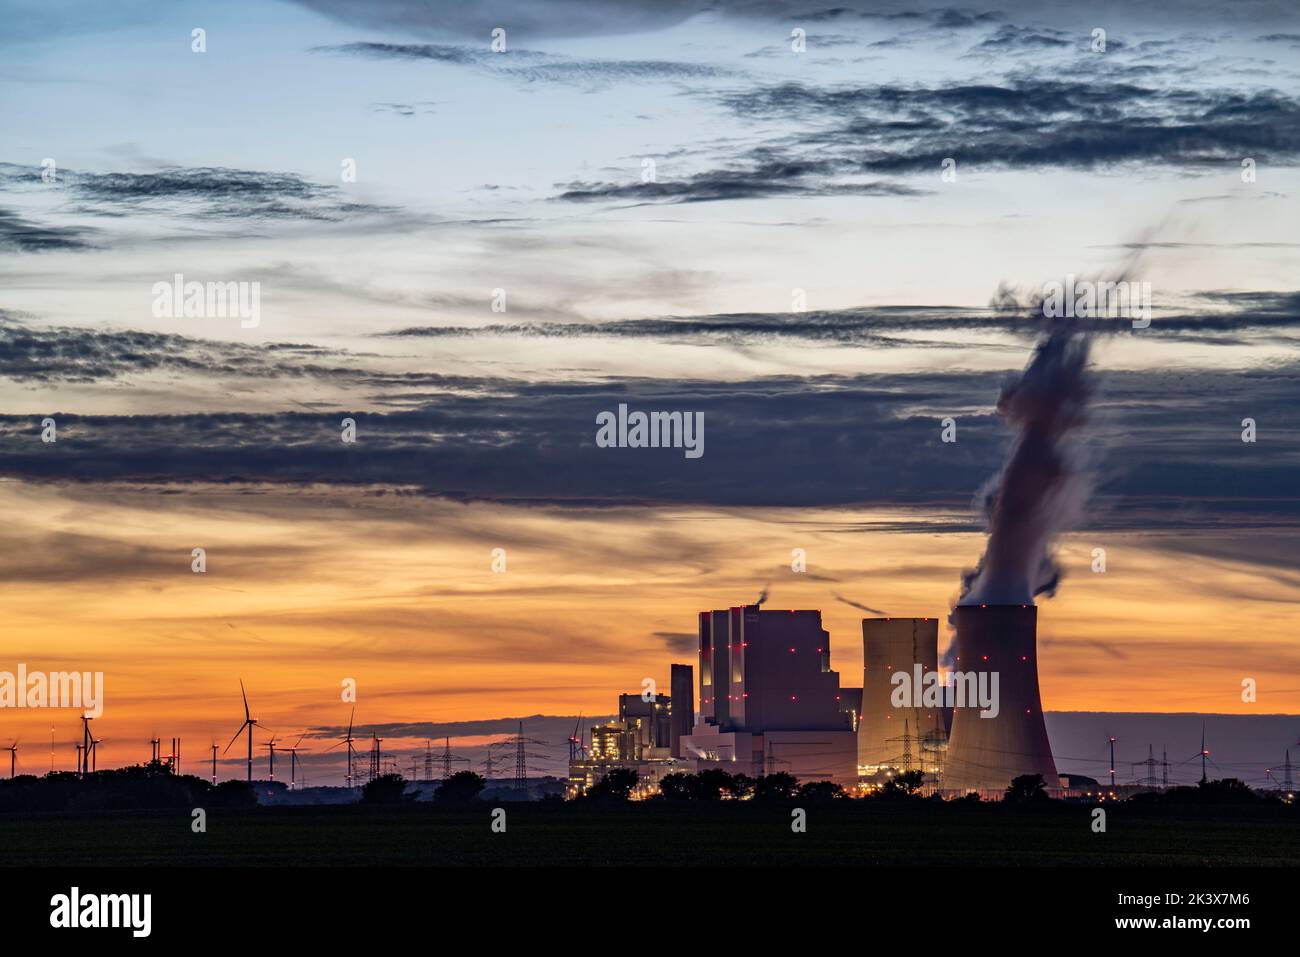 The RWE lignite-fired power plant Neurath, near Grevenbroich, largest German coal-fired power plant, second largest in Europe, unit F-G, wind farm, su Stock Photo